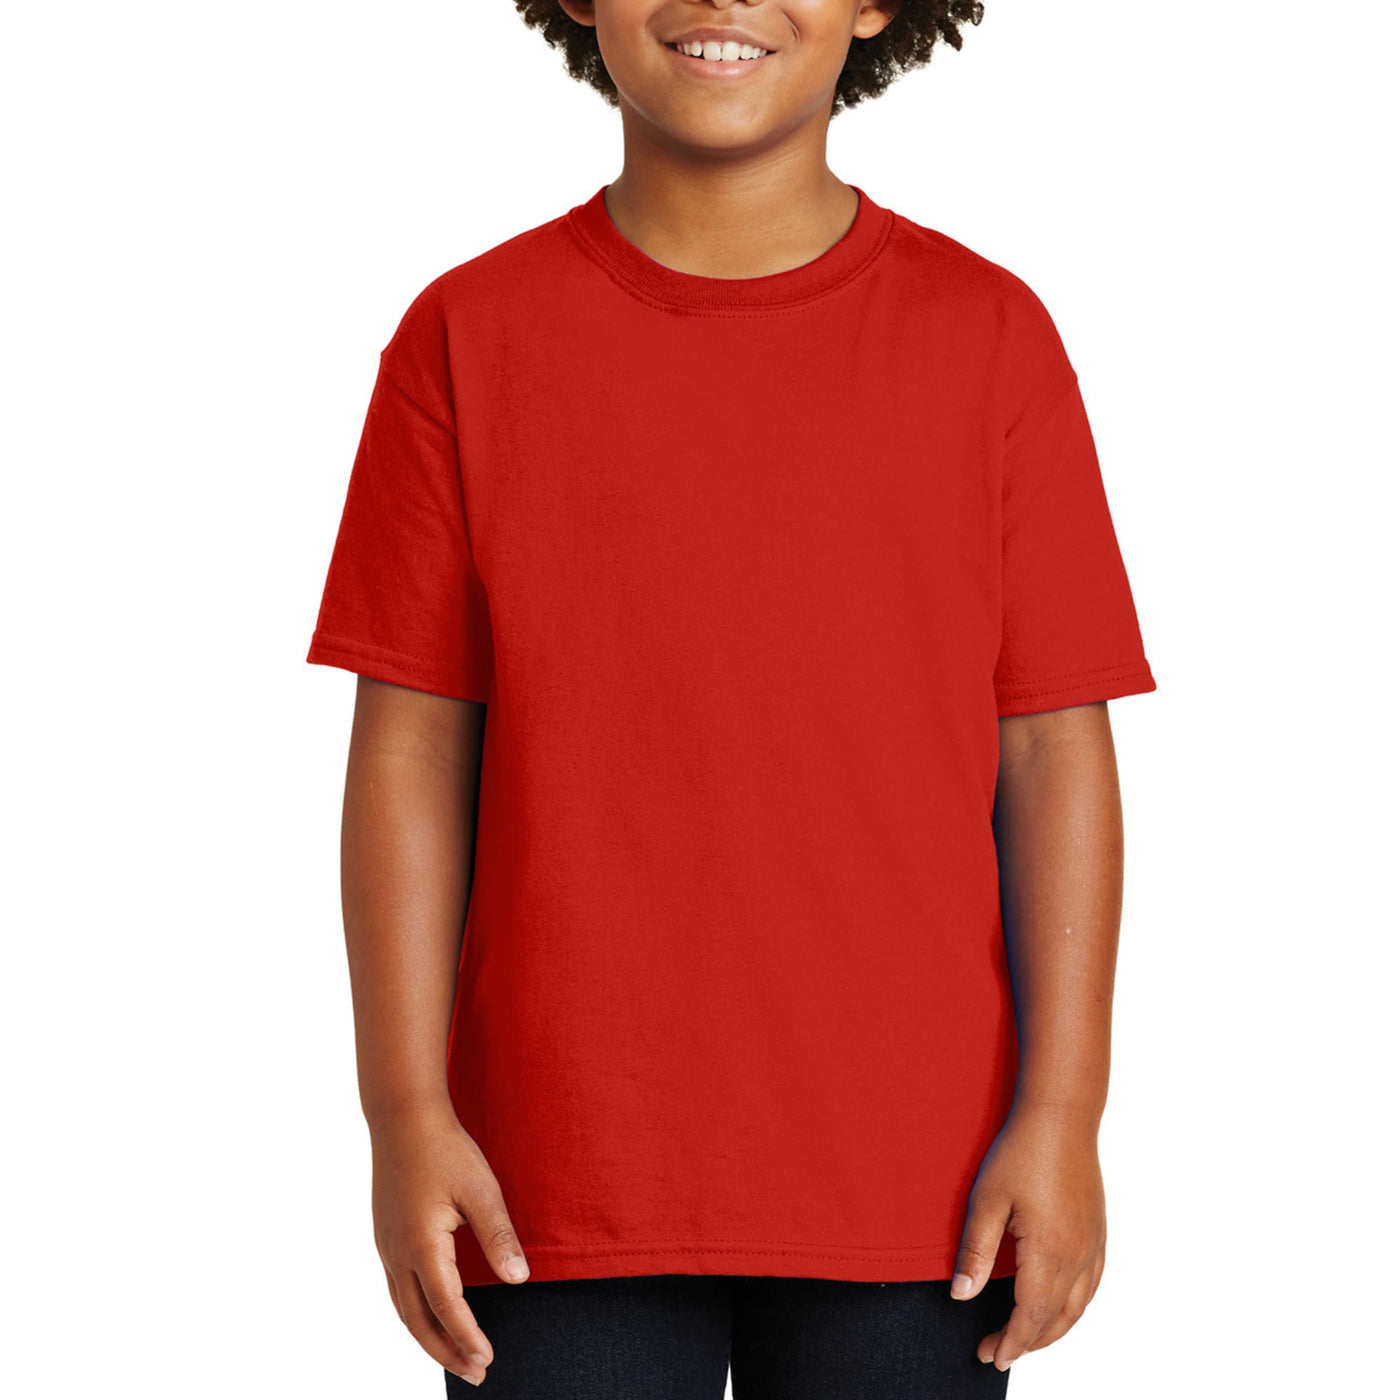 Youth Graphic T-Shirt - Youth | T-Shirts